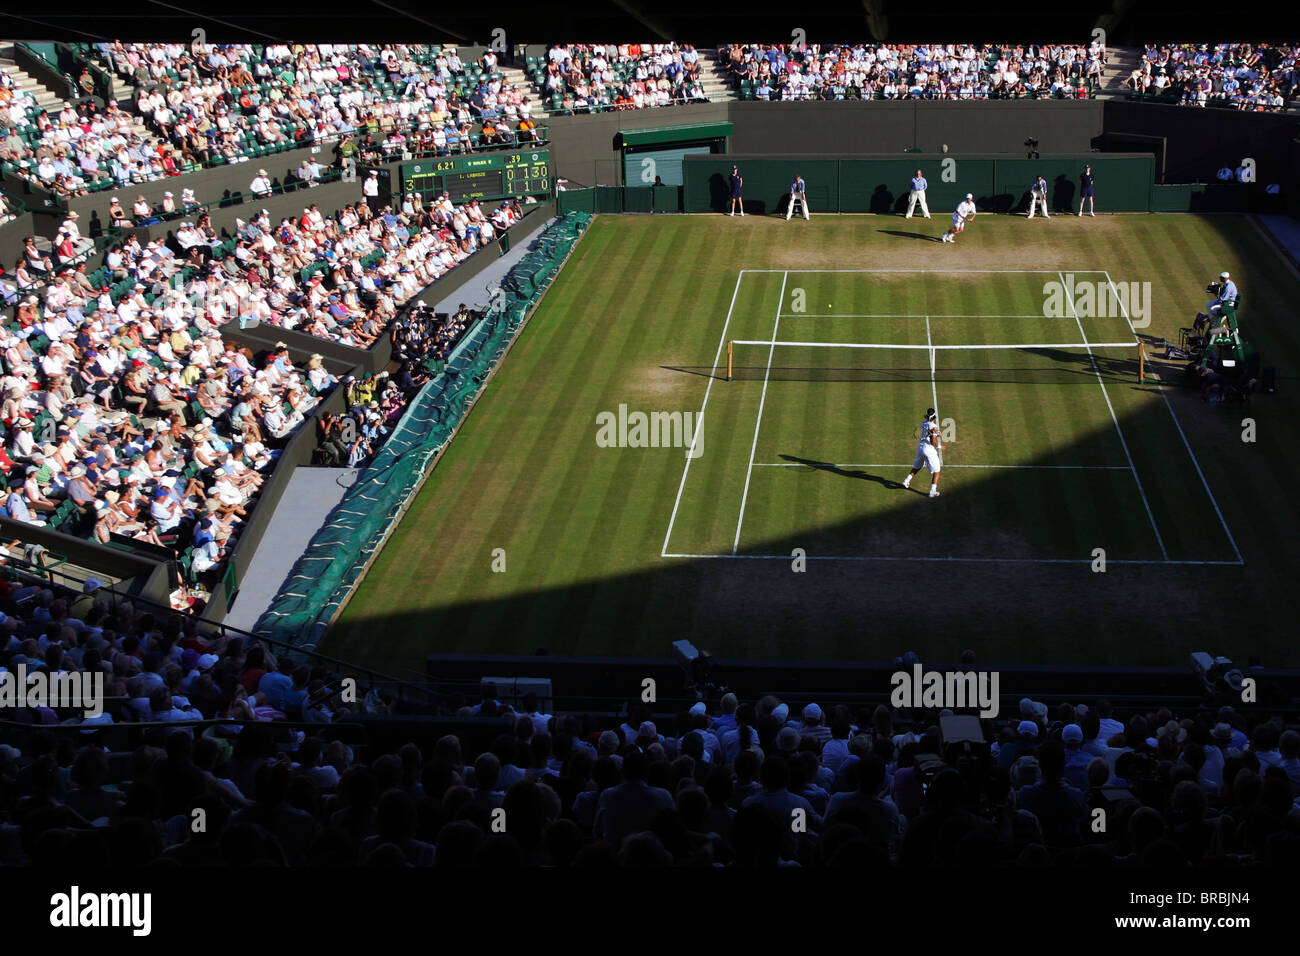 Large crowd watching a tennis match Stock Photo